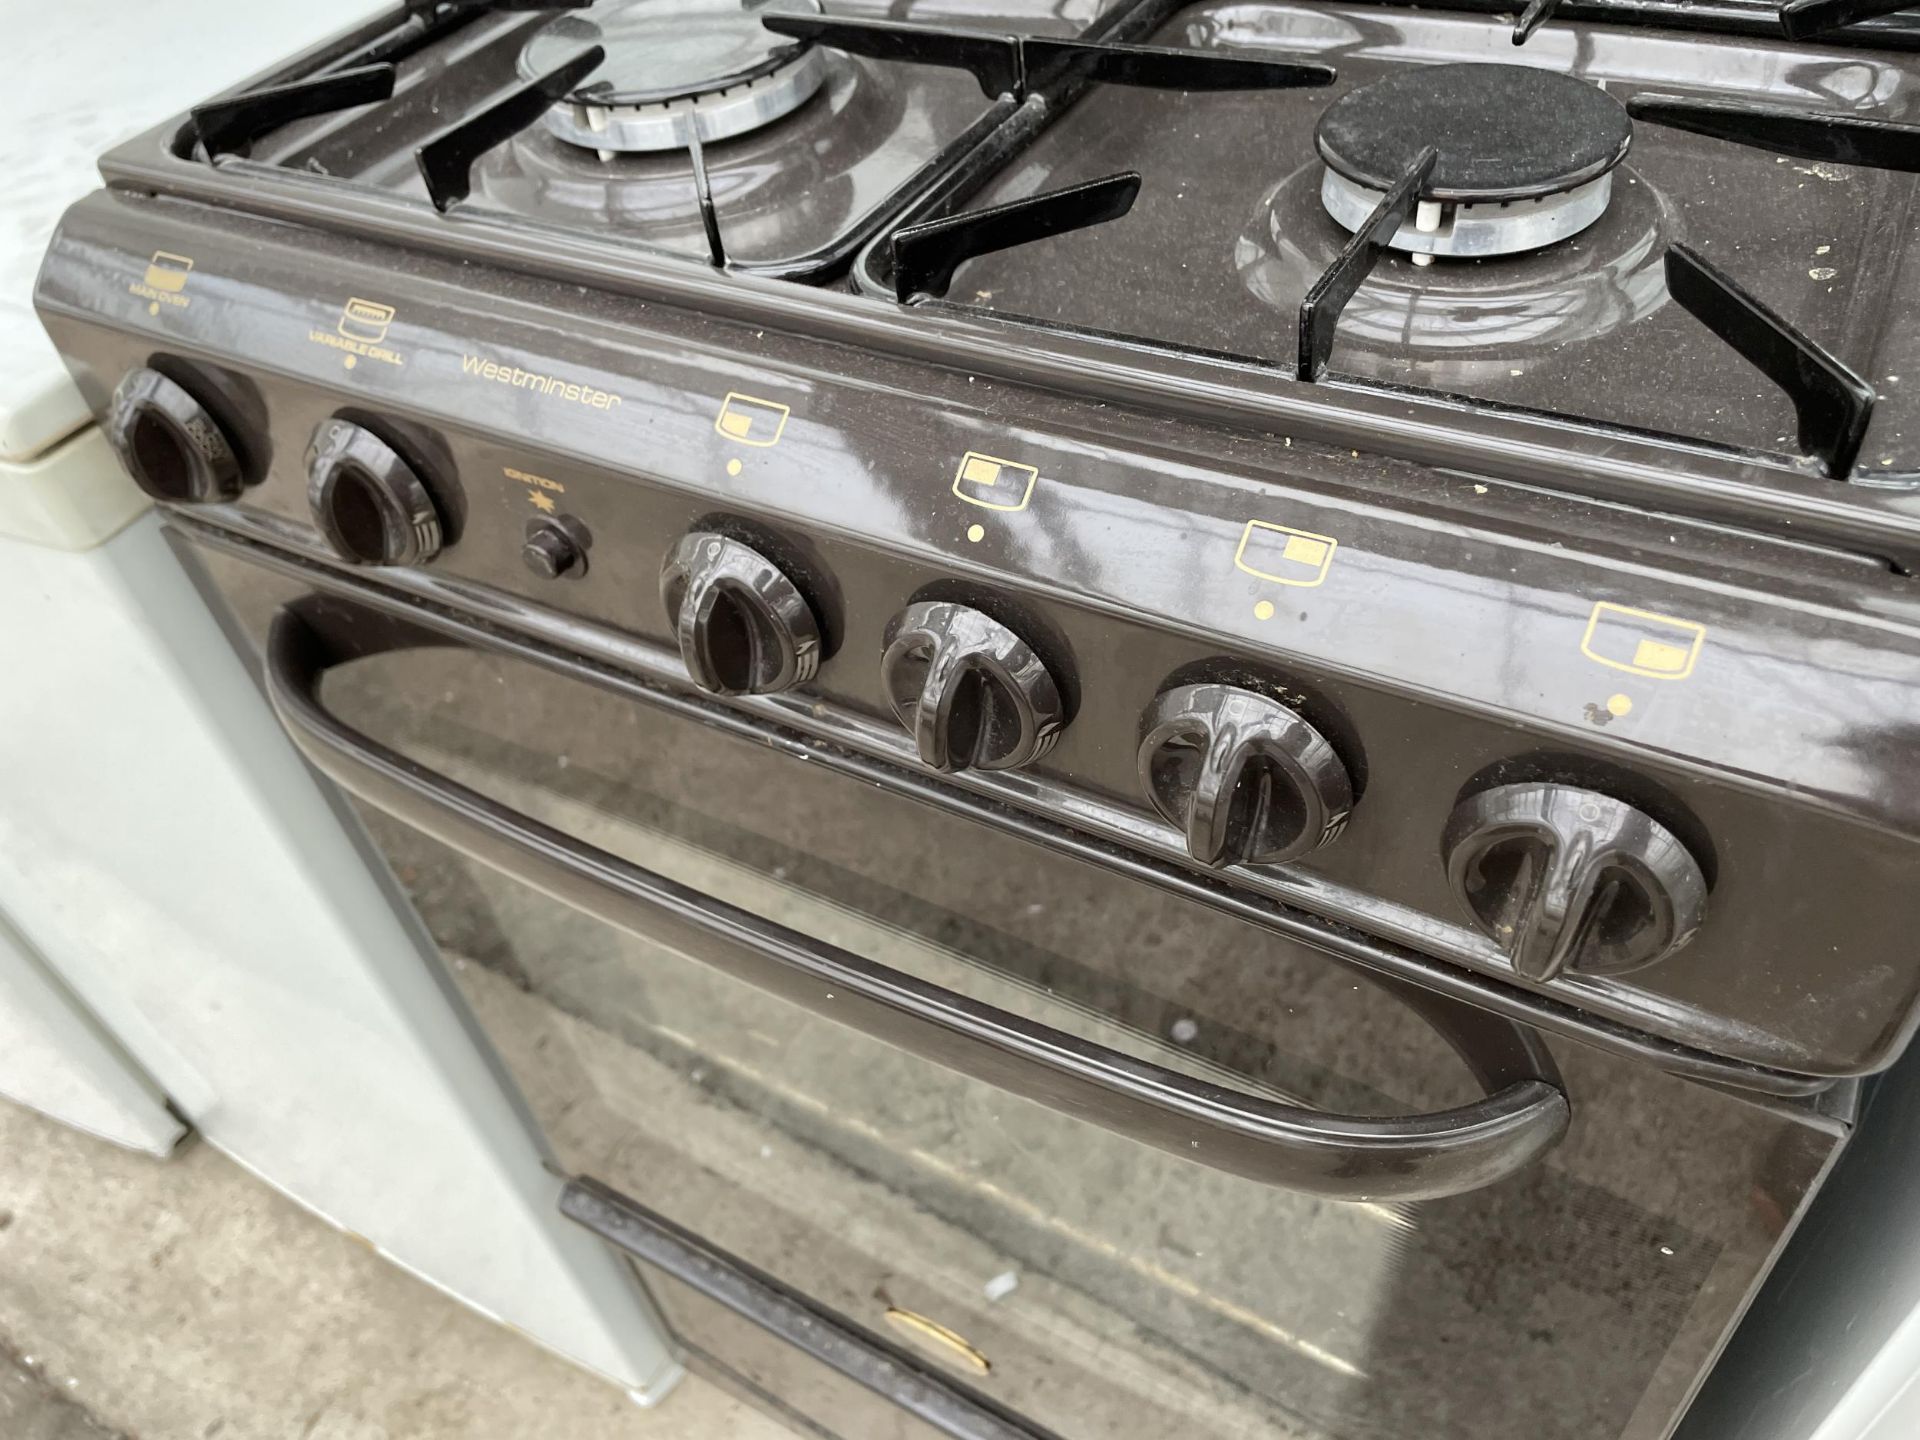 A BLACK CANON FREESTANDING OVEN AND HOB - Image 2 of 5